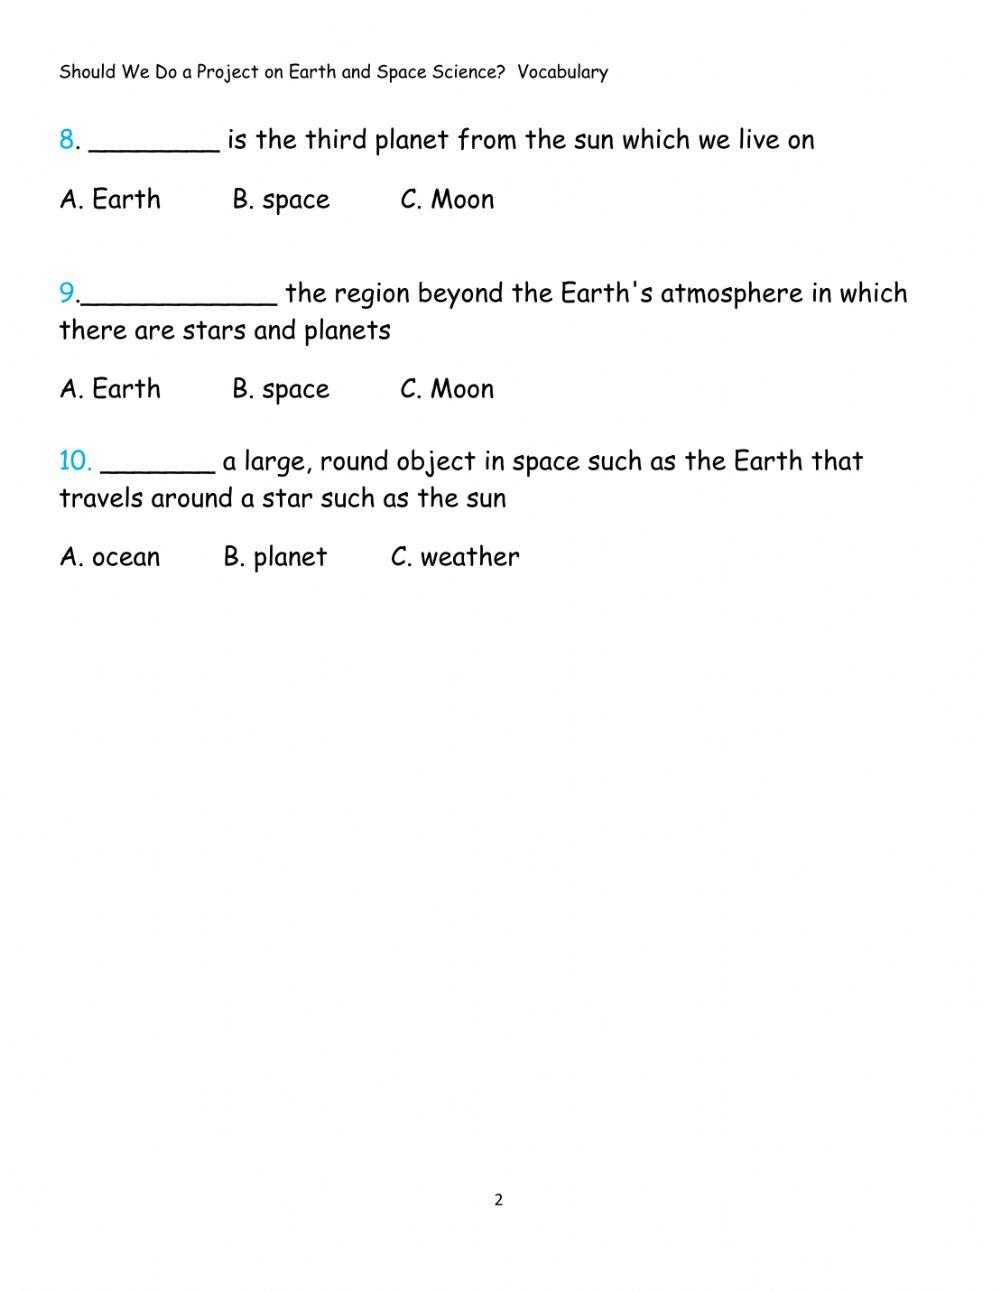 Should We do a Project in Earth and Space Science